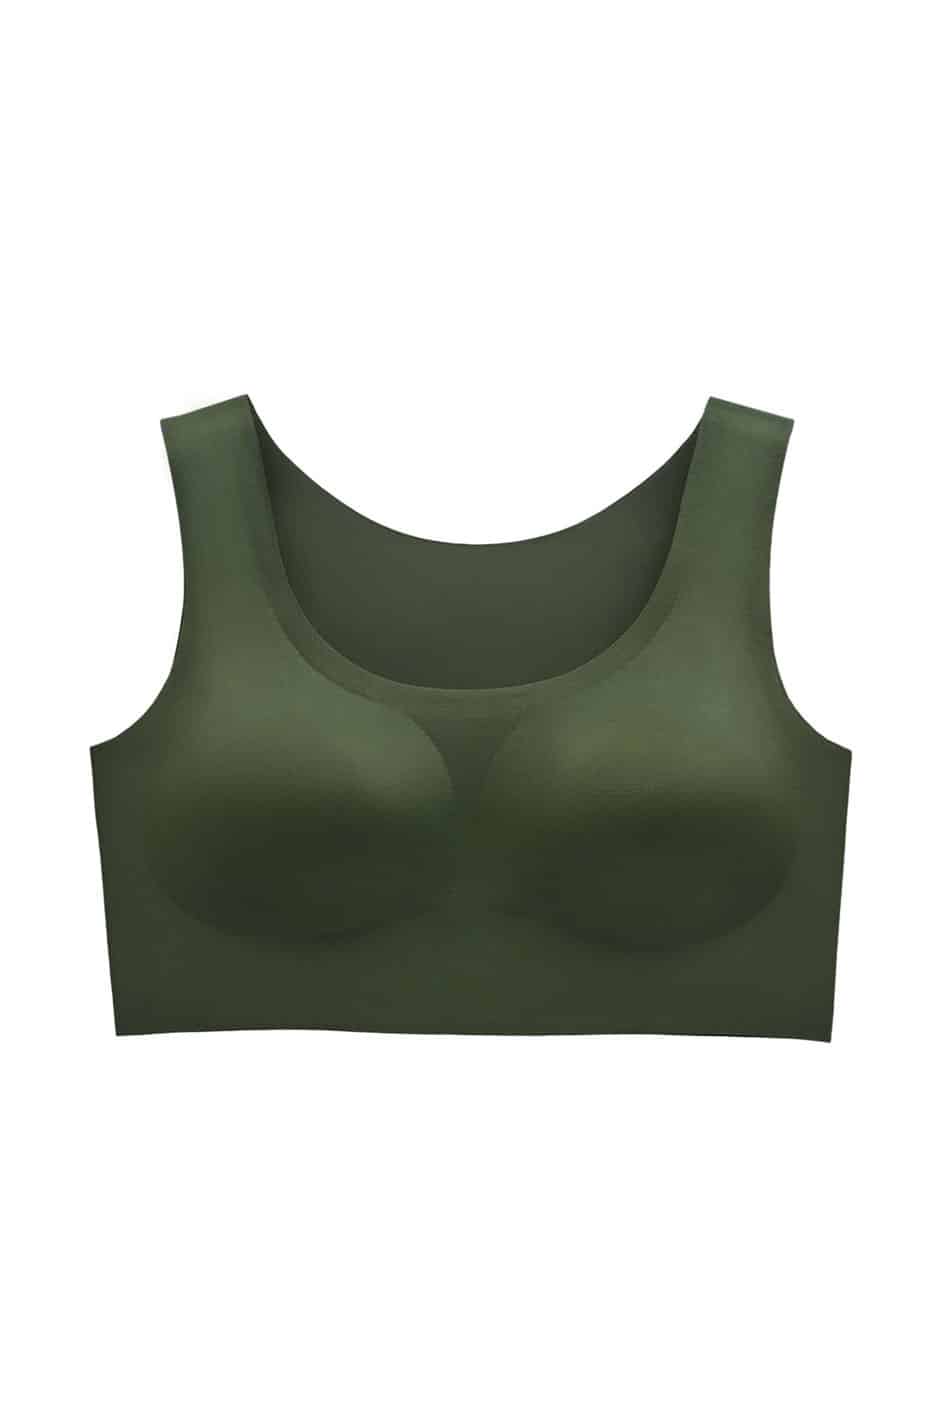 Tanktop No Bra, The other option is to wear a sports bra type pullover bra,  or layer a fitted tank top under your shirt (holds it in place without  being a bra).